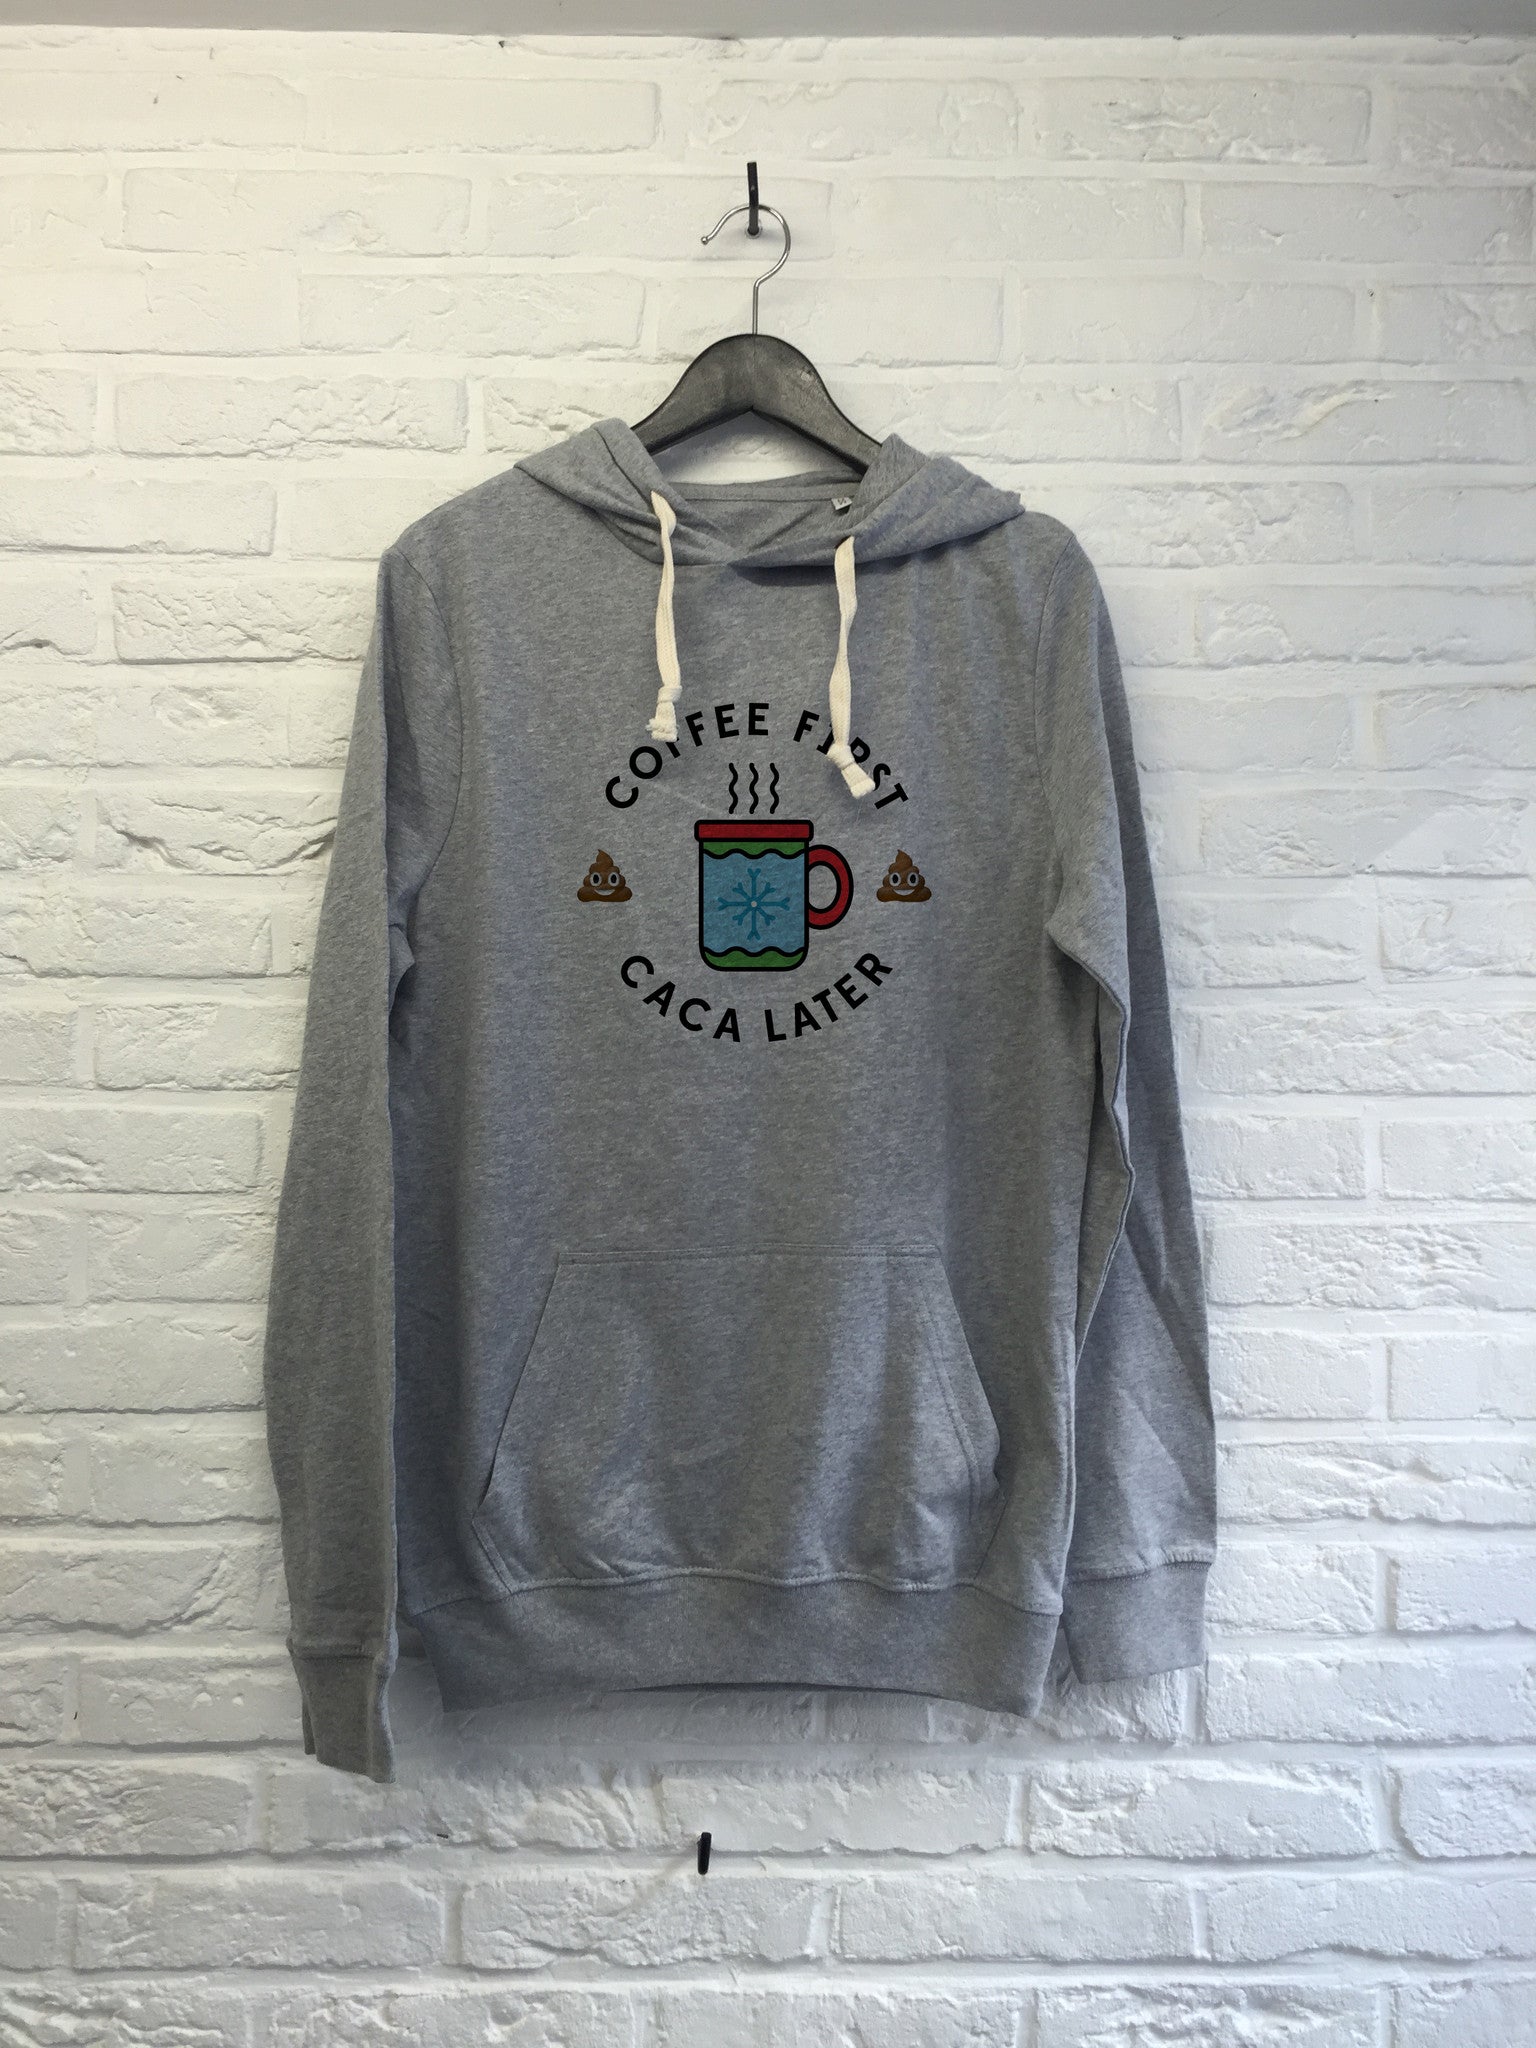 Coffee first Caca later - Hoodie super soft touch-Sweat shirts-Atelier Amelot